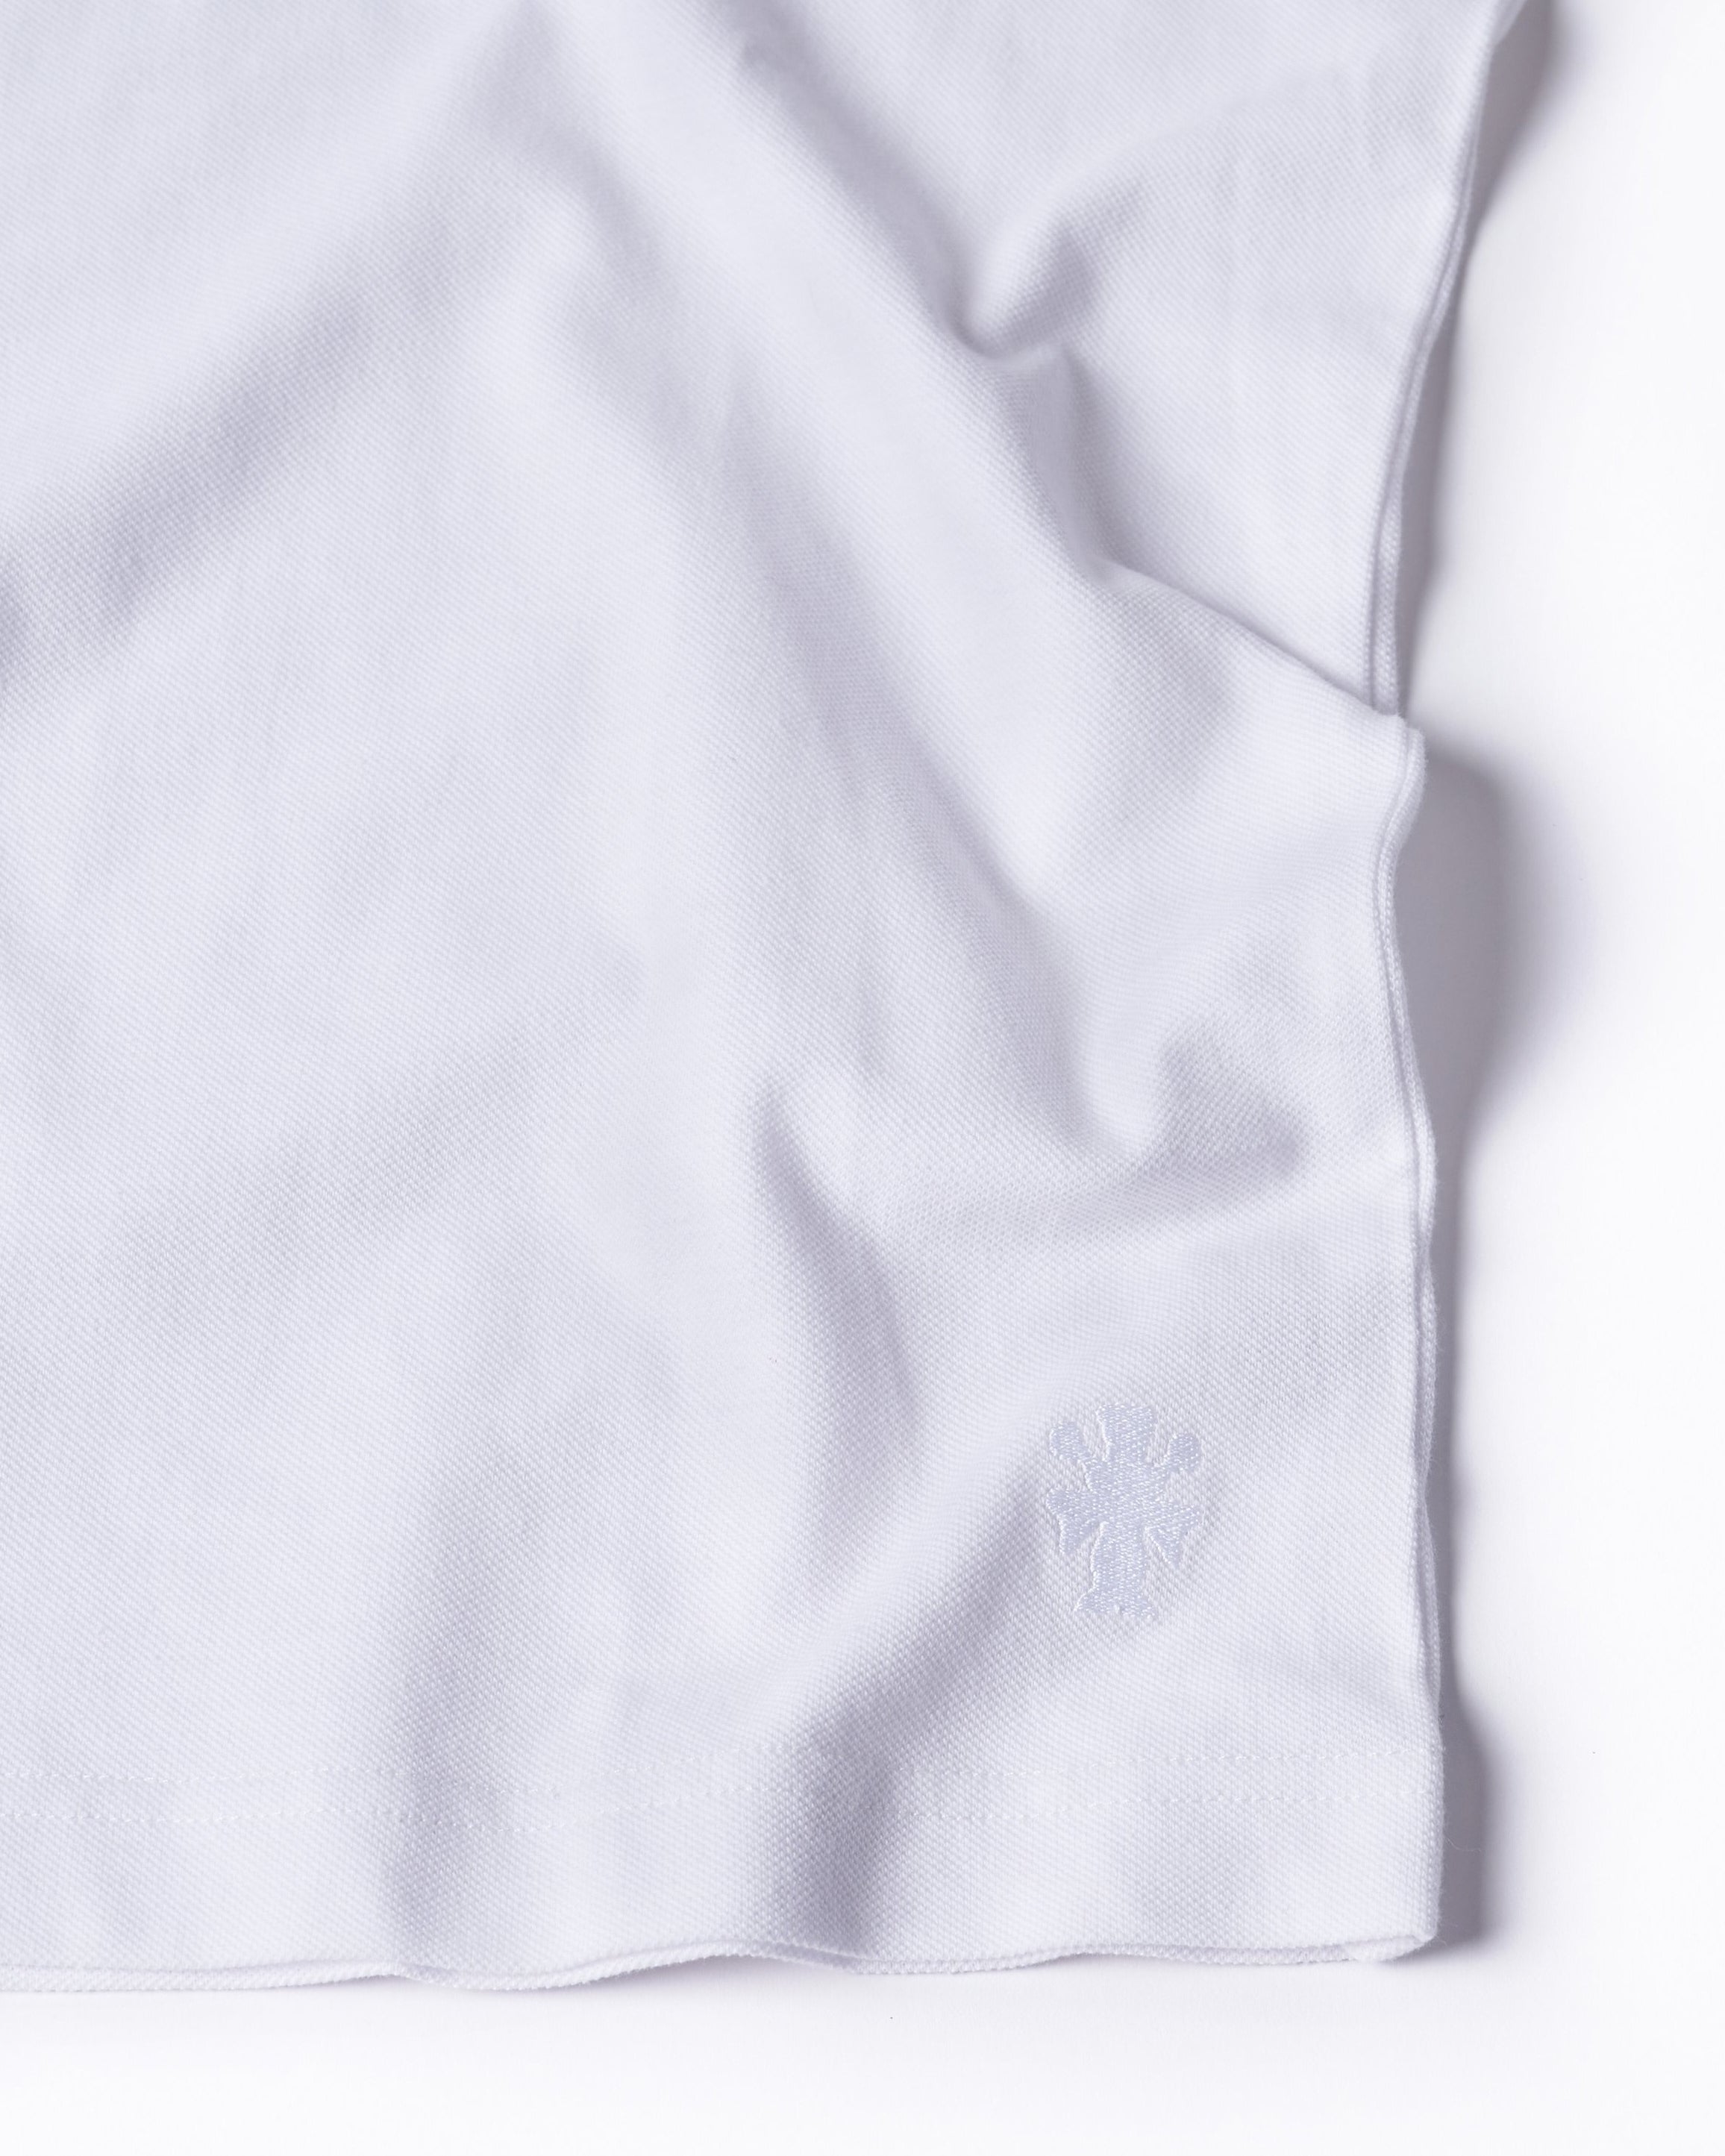 The Long Sleeve Pique Tee in Brilliant White